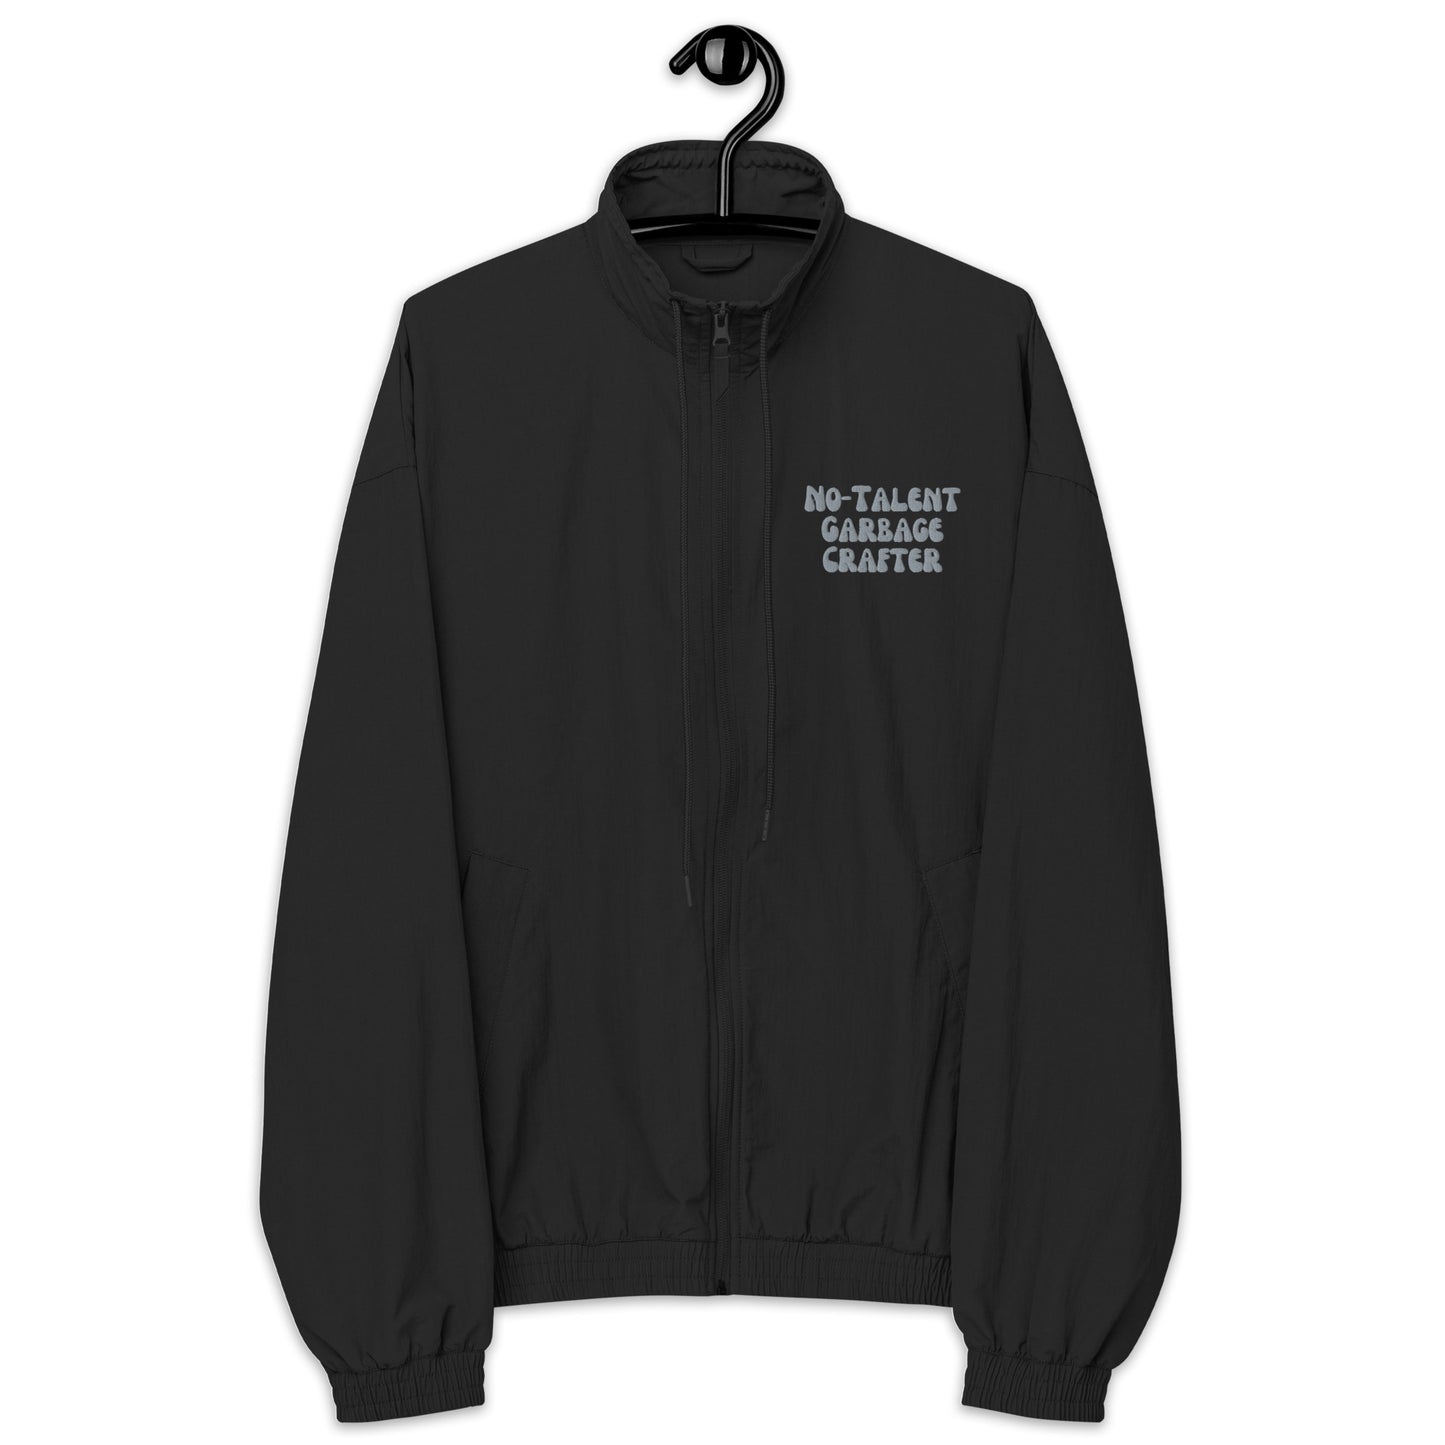 No-Talent Garbage Crafter- Recycled tracksuit jacket